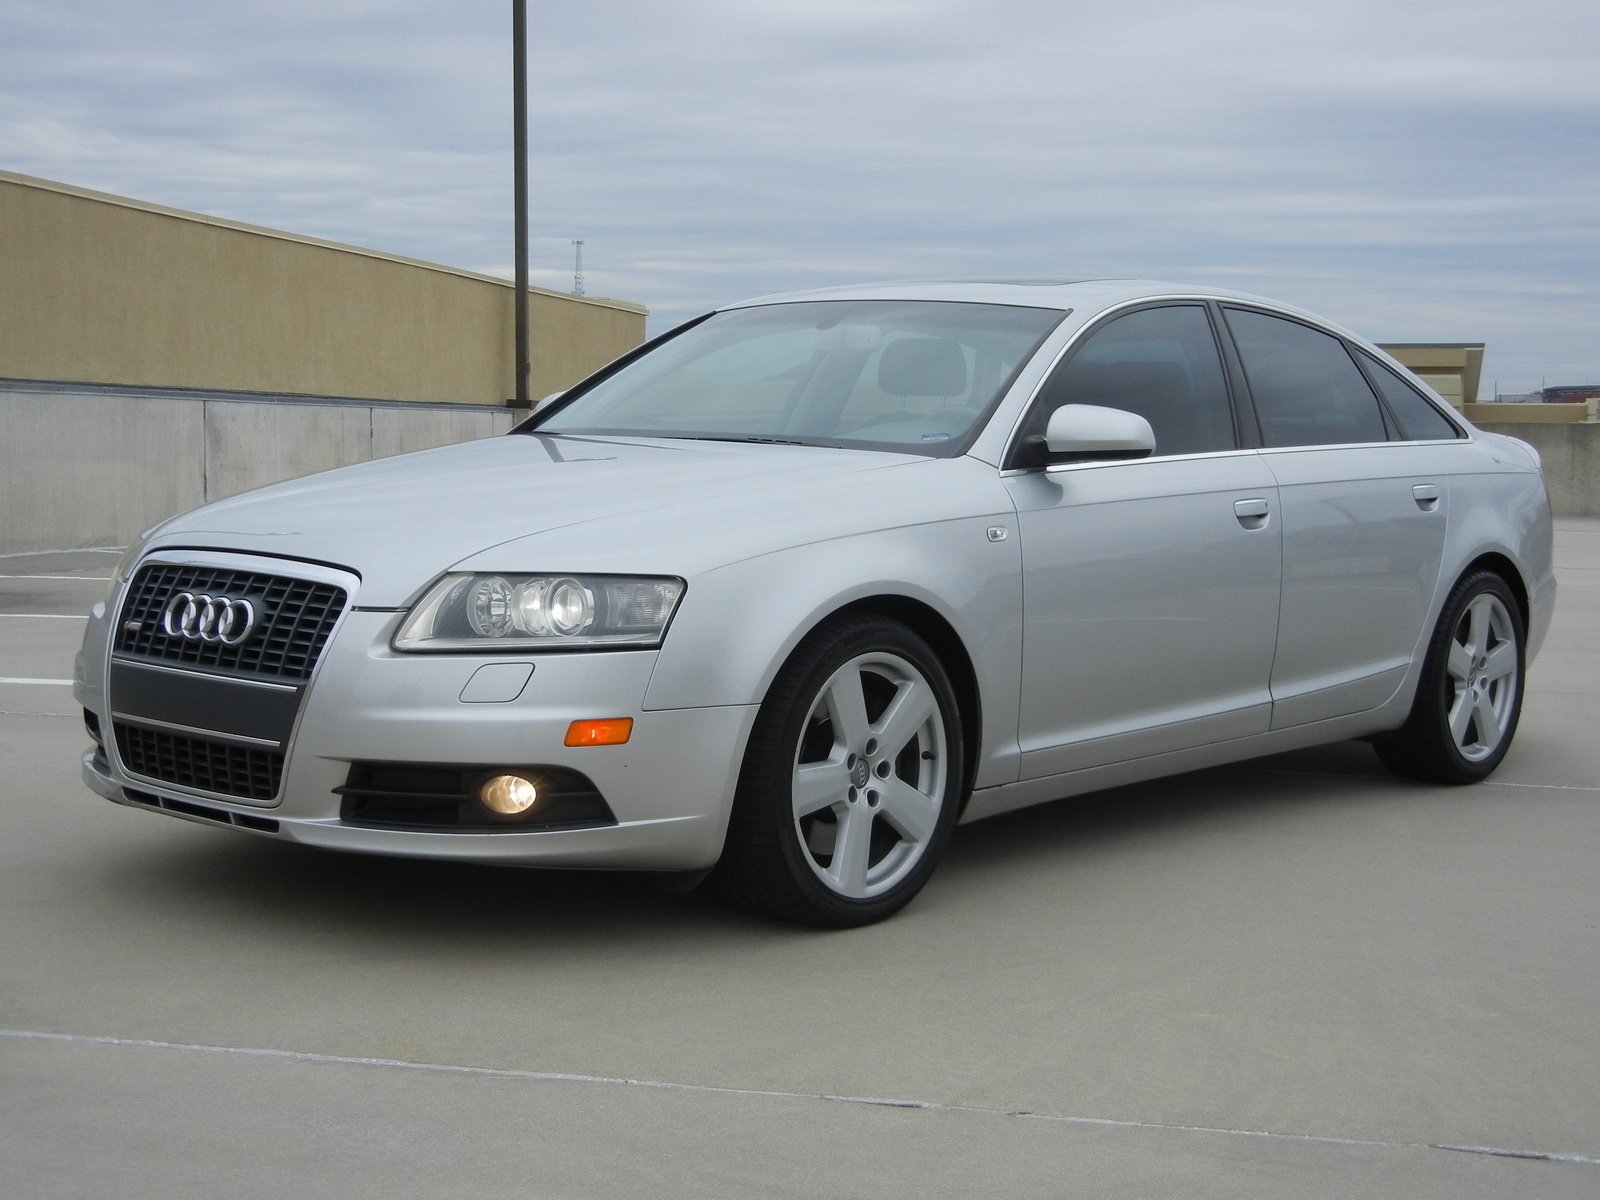 2005 Audi A6: Prices, Reviews & Pictures - CarGurus